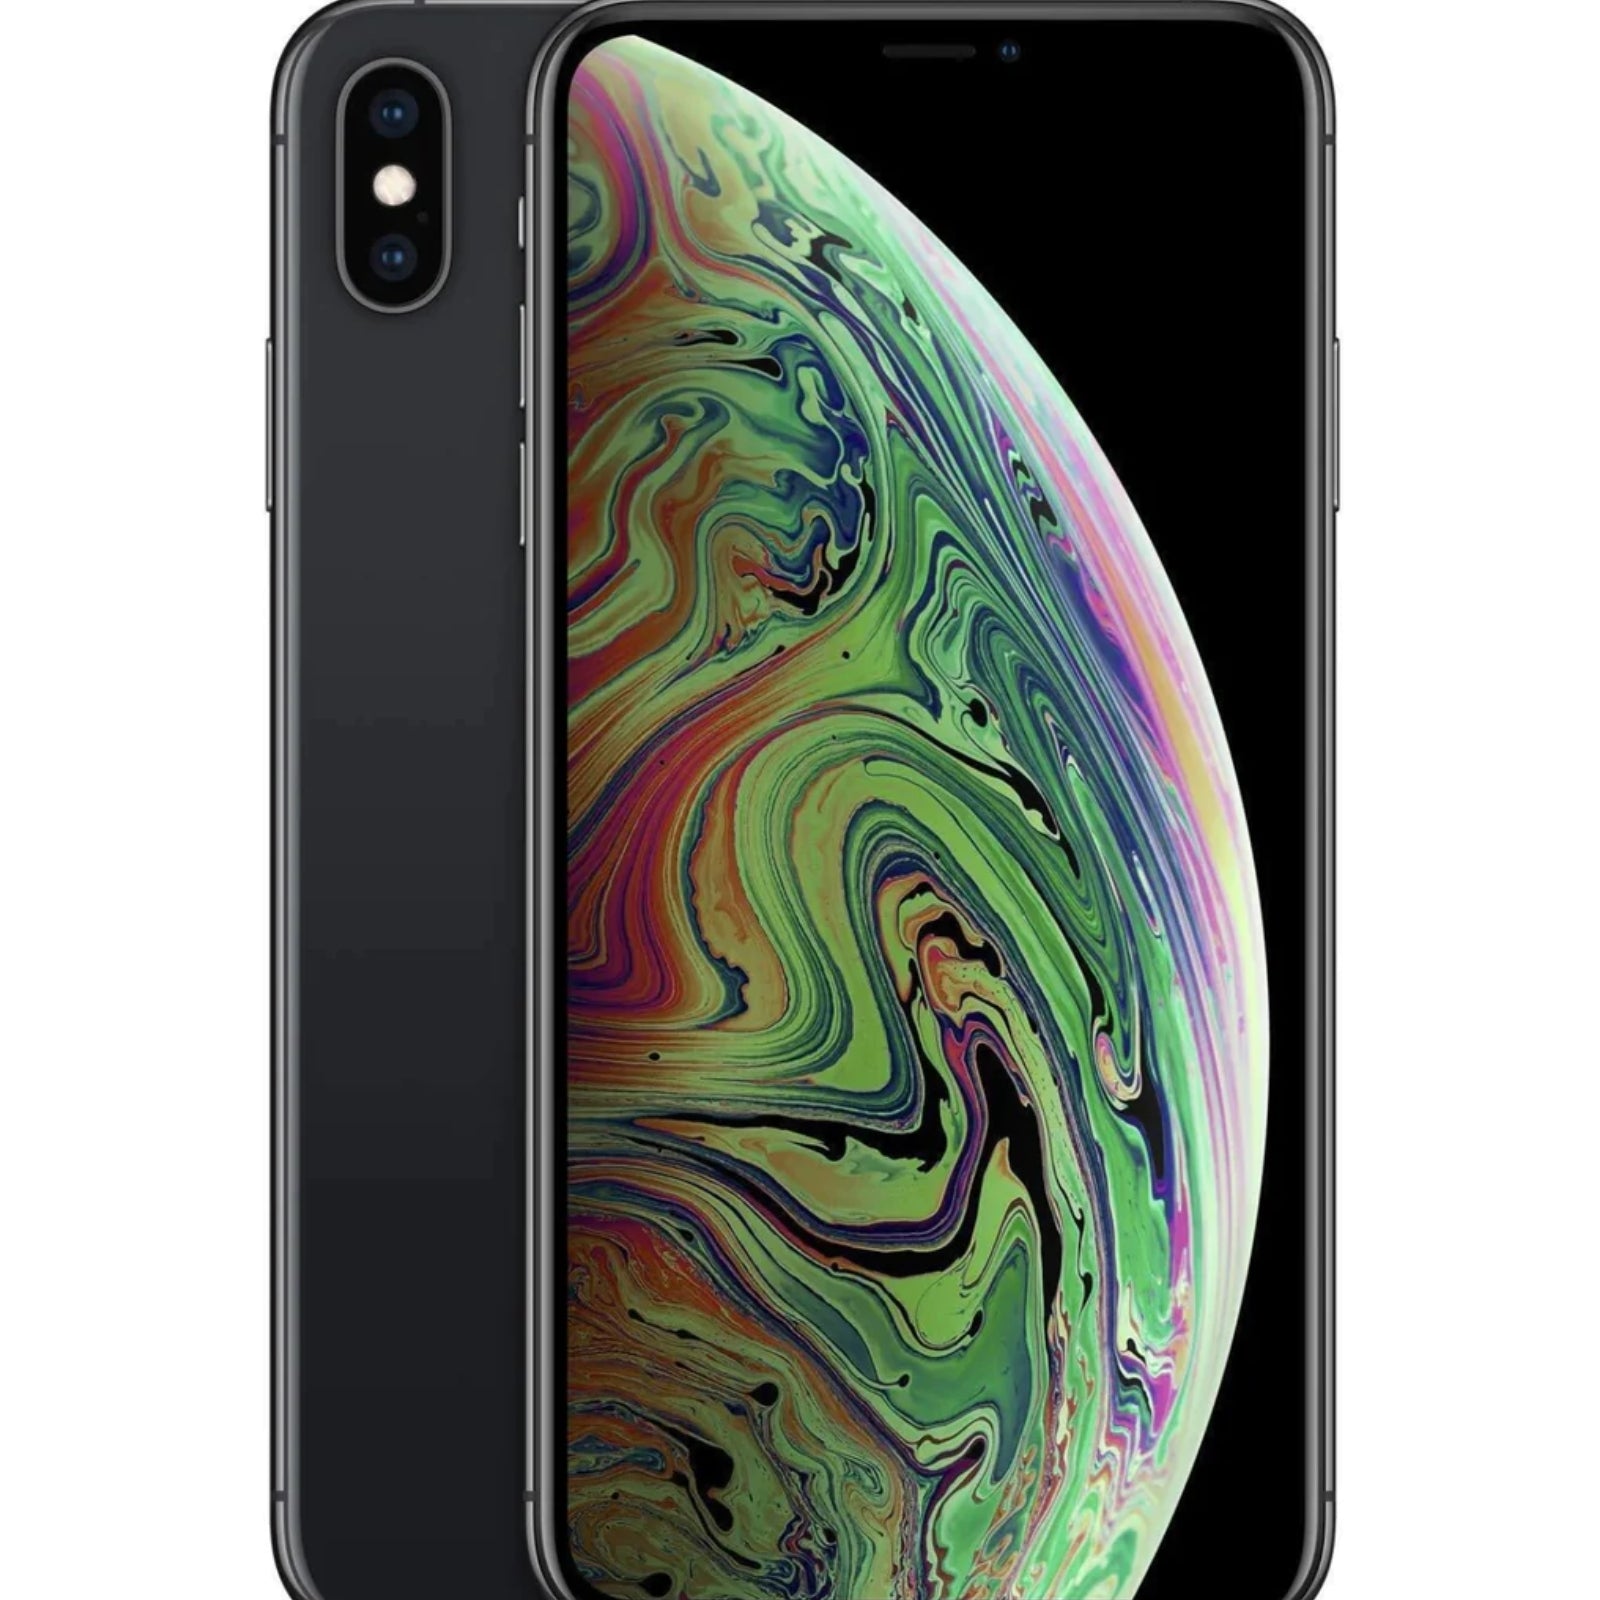 Apple Iphone Xs Max Pre Owned A Grade Condition